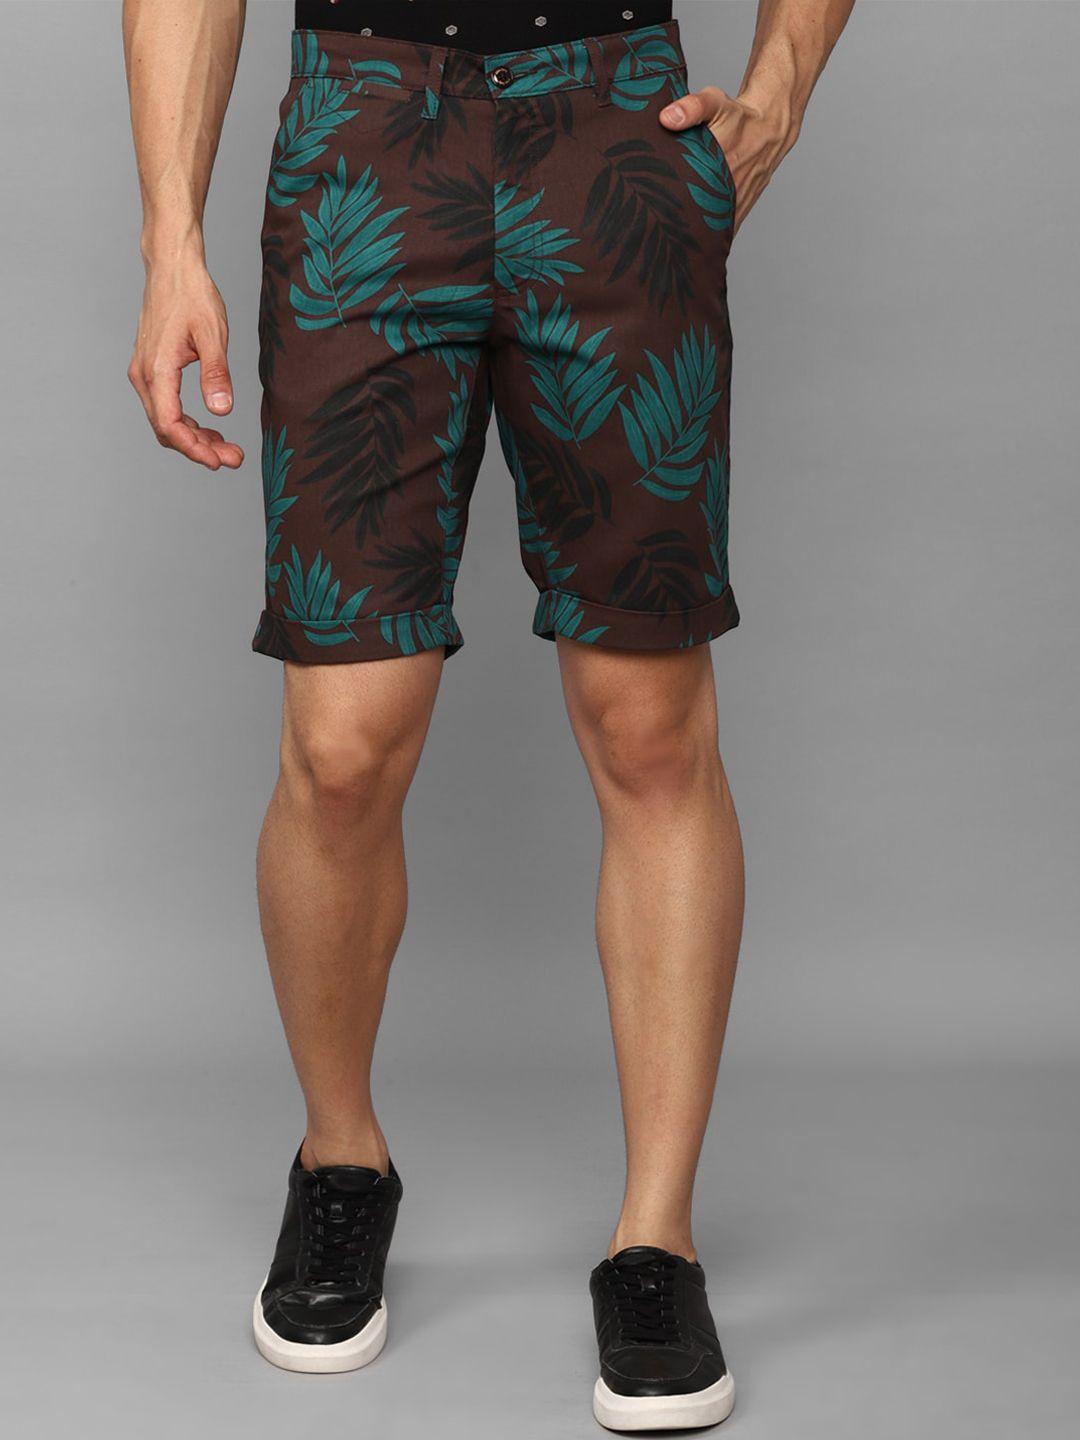 allen solly men tropical printed slim fit mid-rise pure cotton shorts